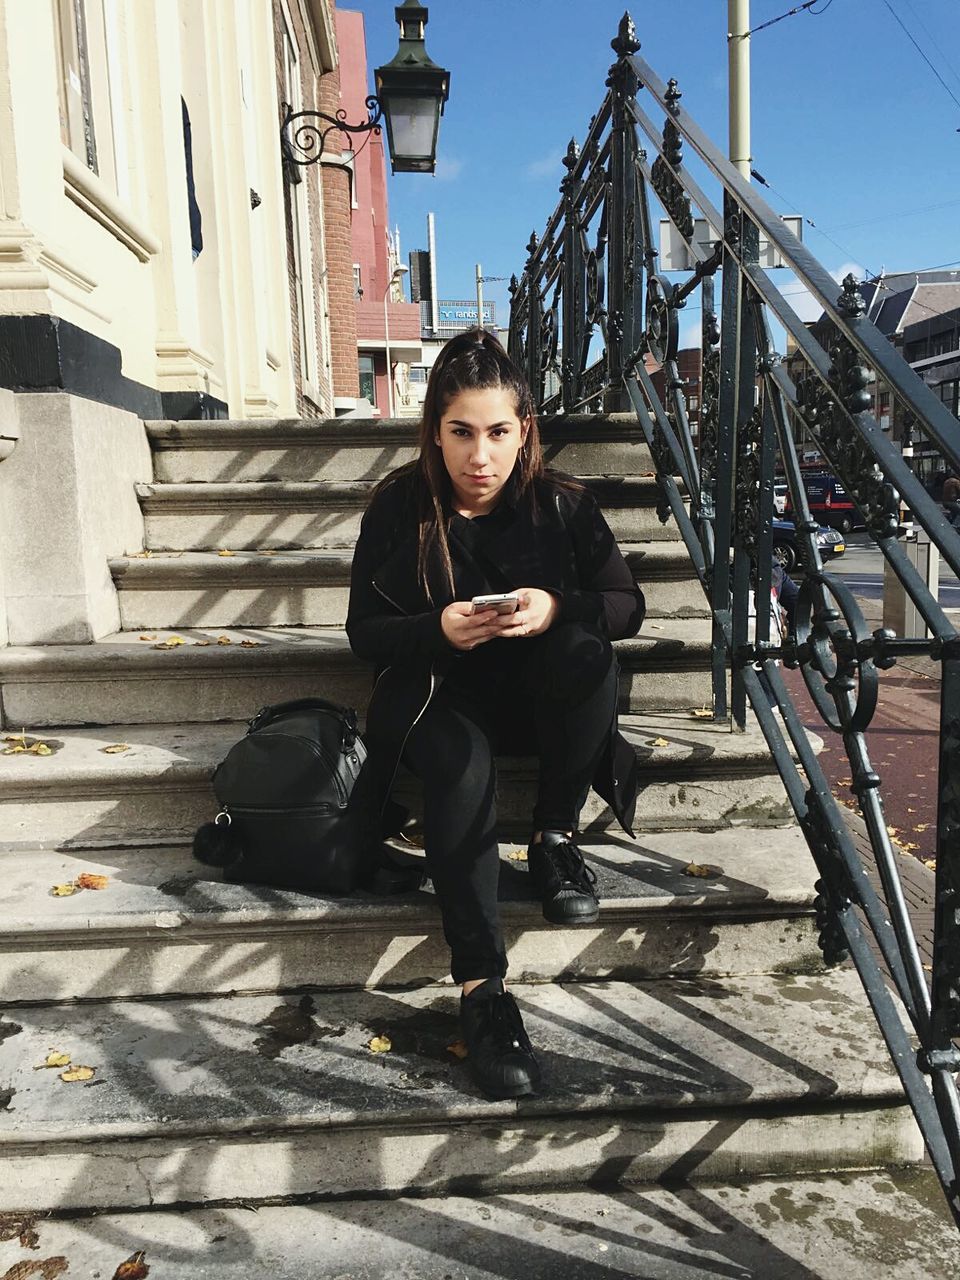 Portrait of young woman using mobile phone while sitting on steps in city